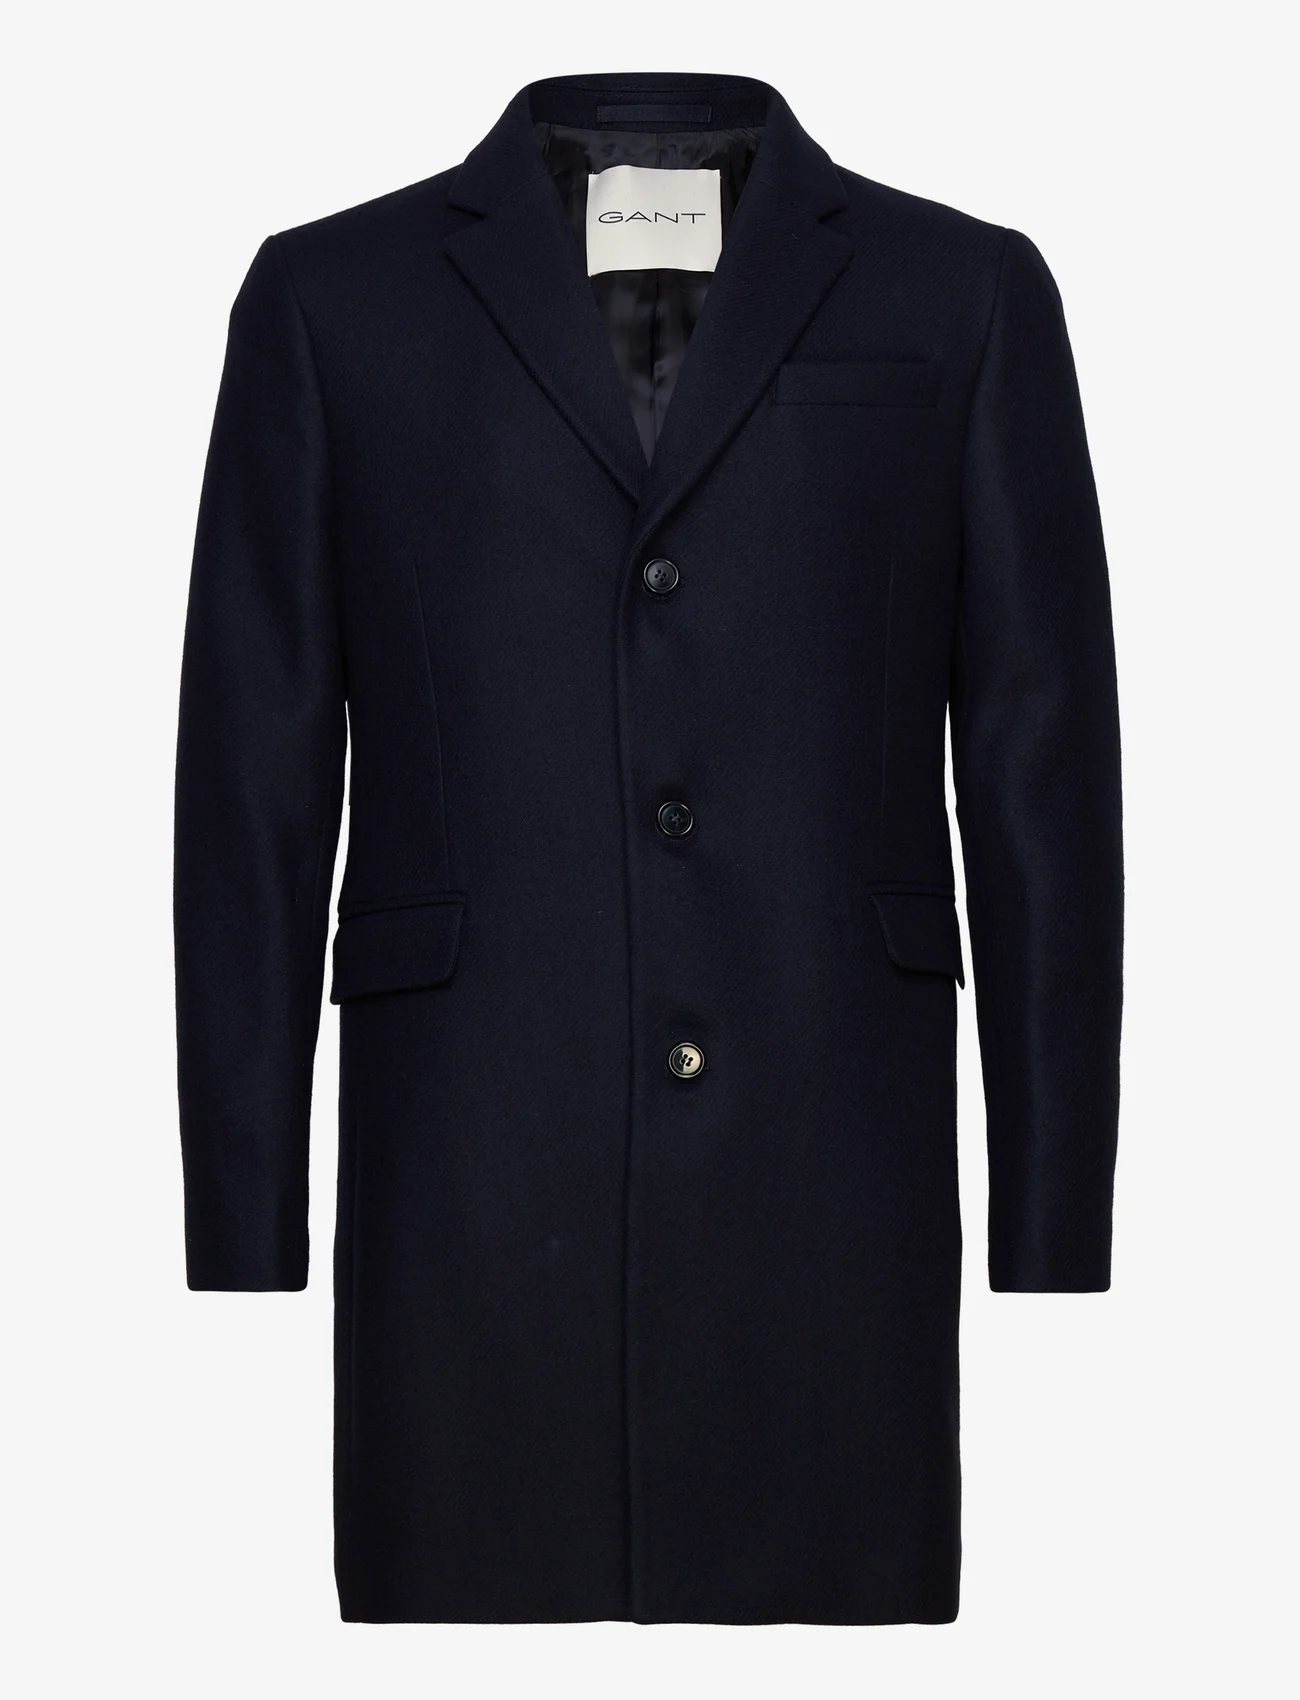 GANT - CLASSIC TAILORED FIT WOOL TOPCOAT - night blue - 0